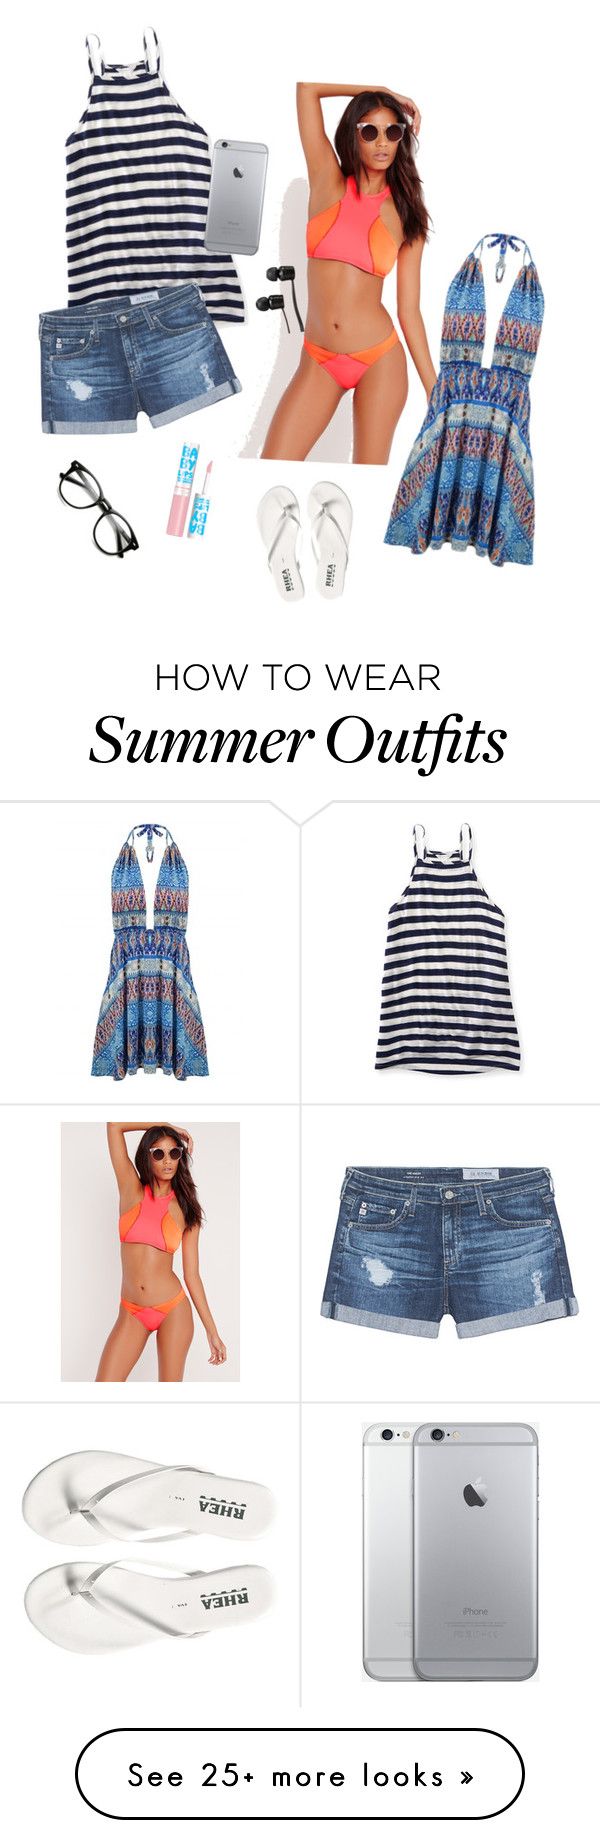 "My outfit today!" by jjjunebug2 on Polyvore featuring AÃ©ropostale,...